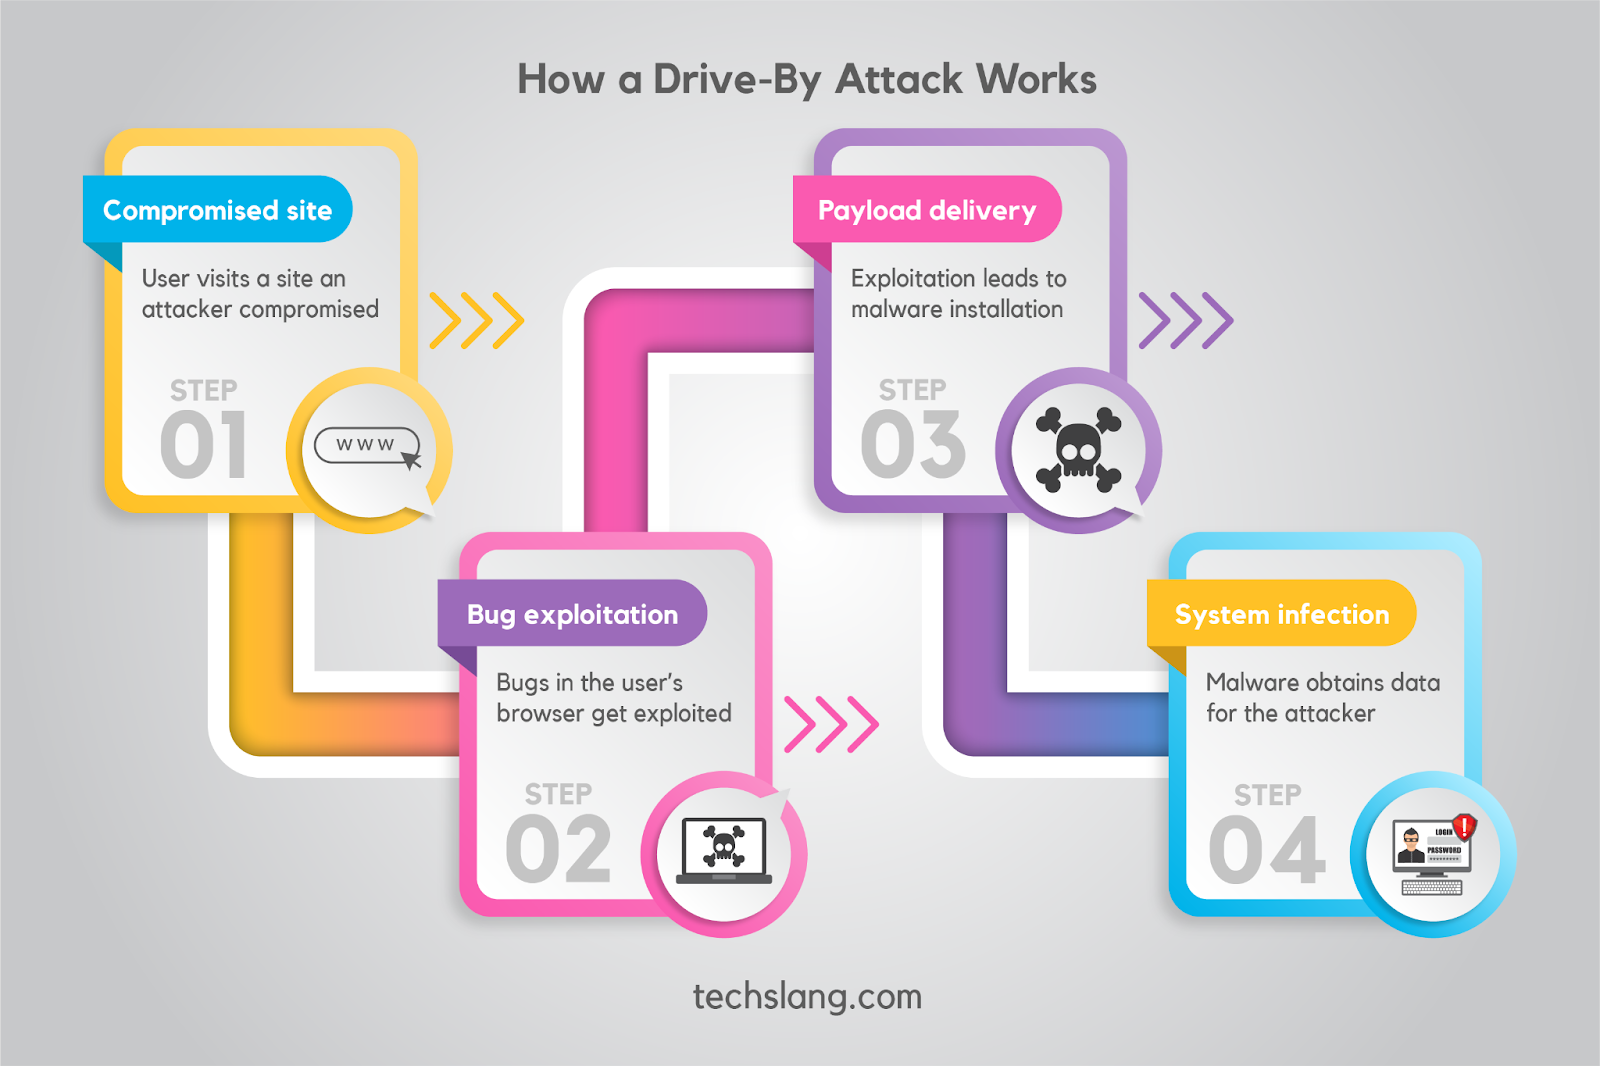 How a Drive-By Attack Works